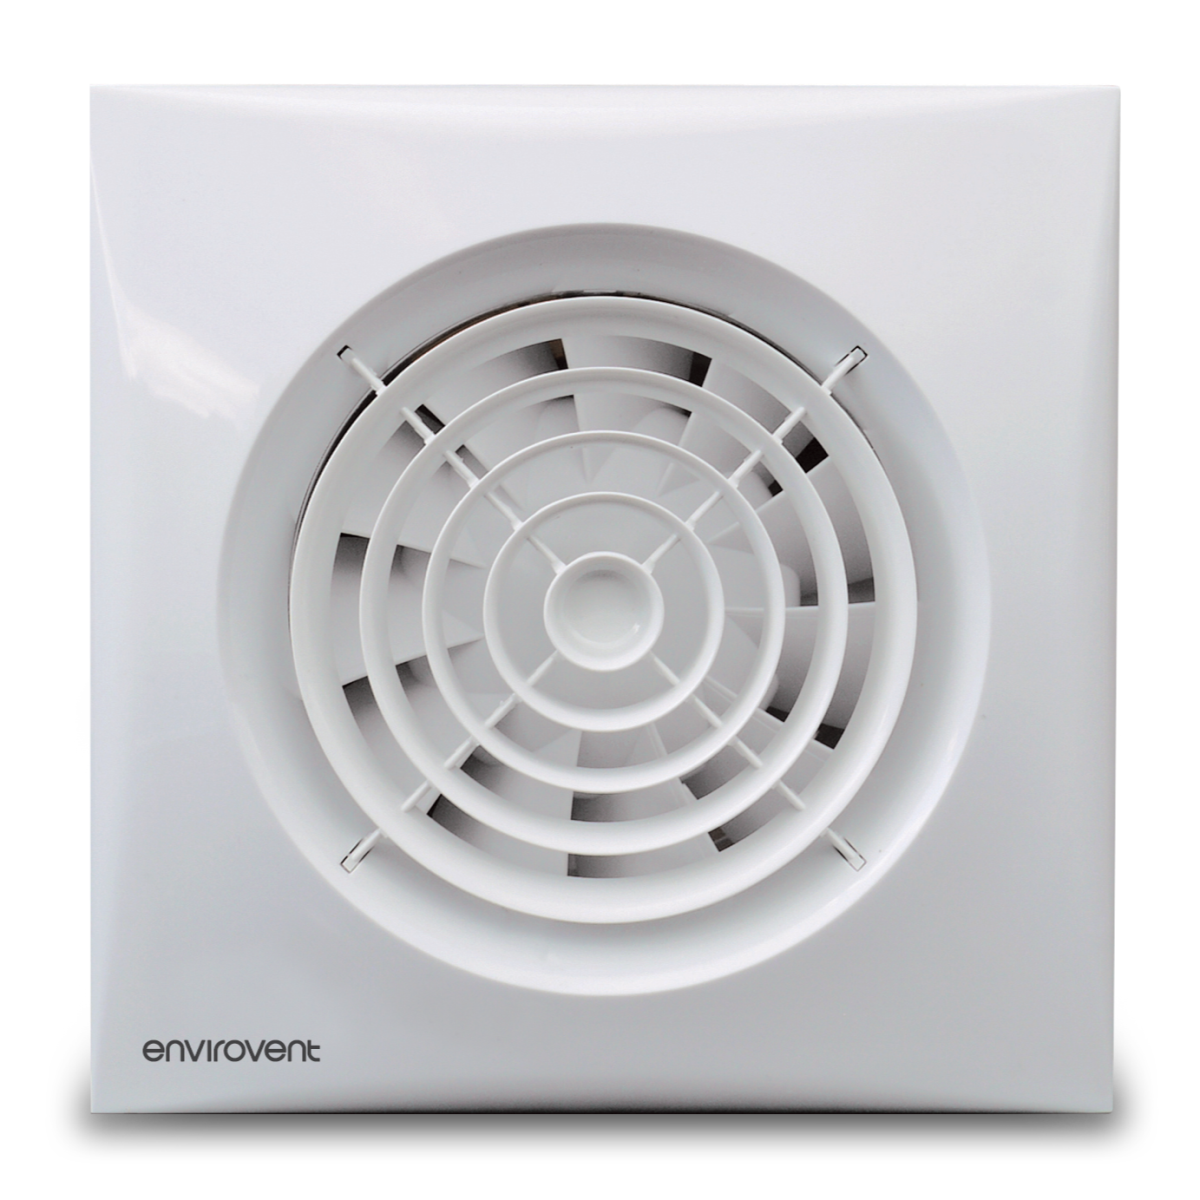 Image of an envirovent shower extractor fan on a white background